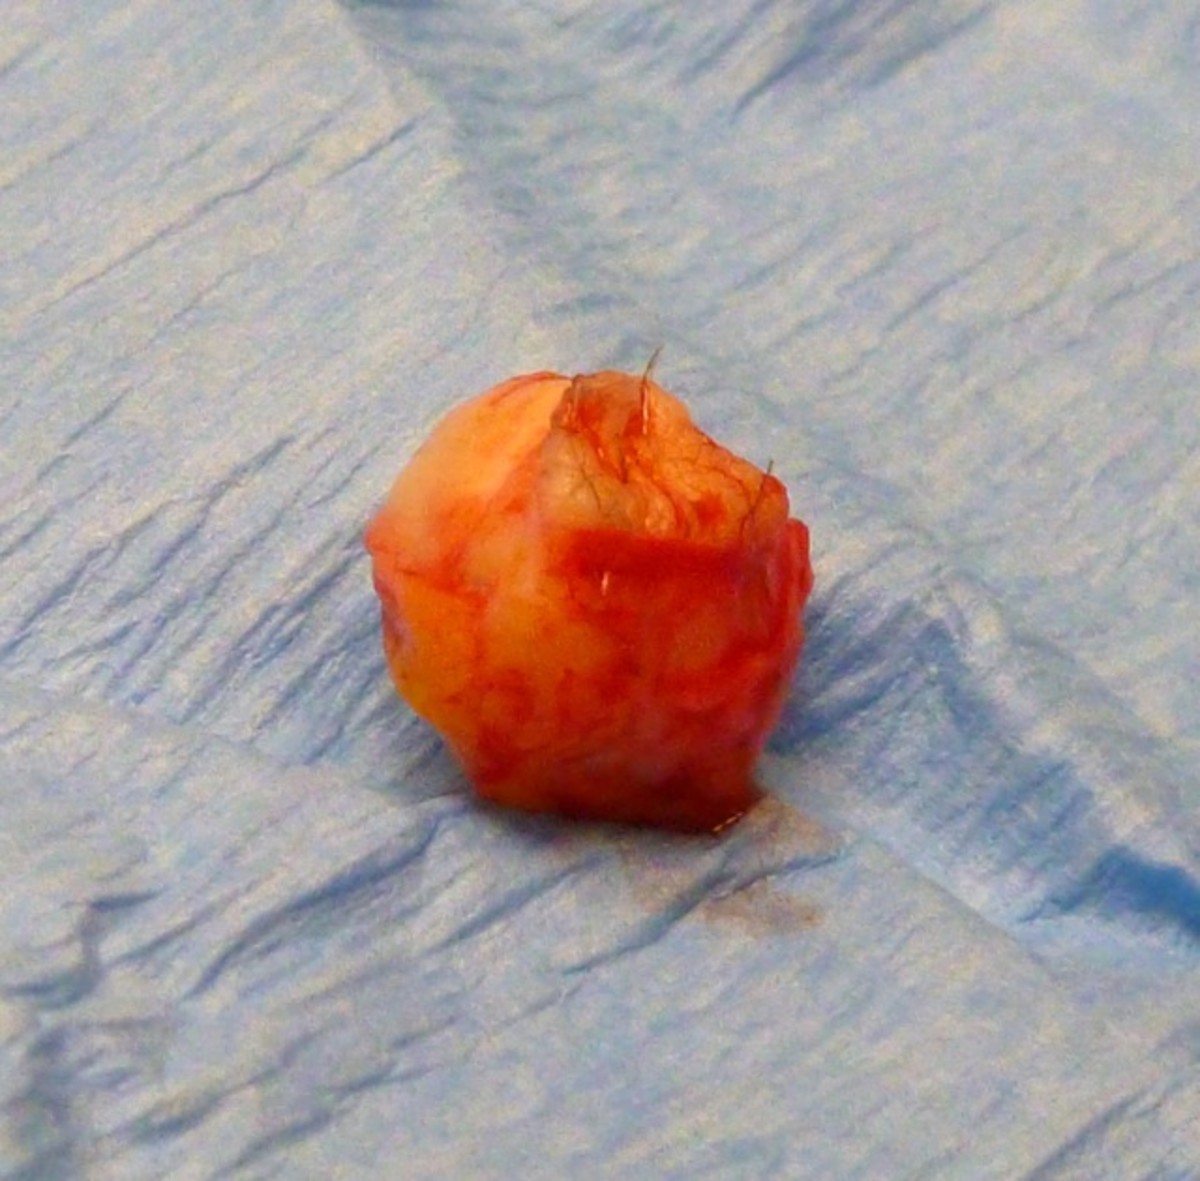 This cyst is just a bit bigger than a large pea.